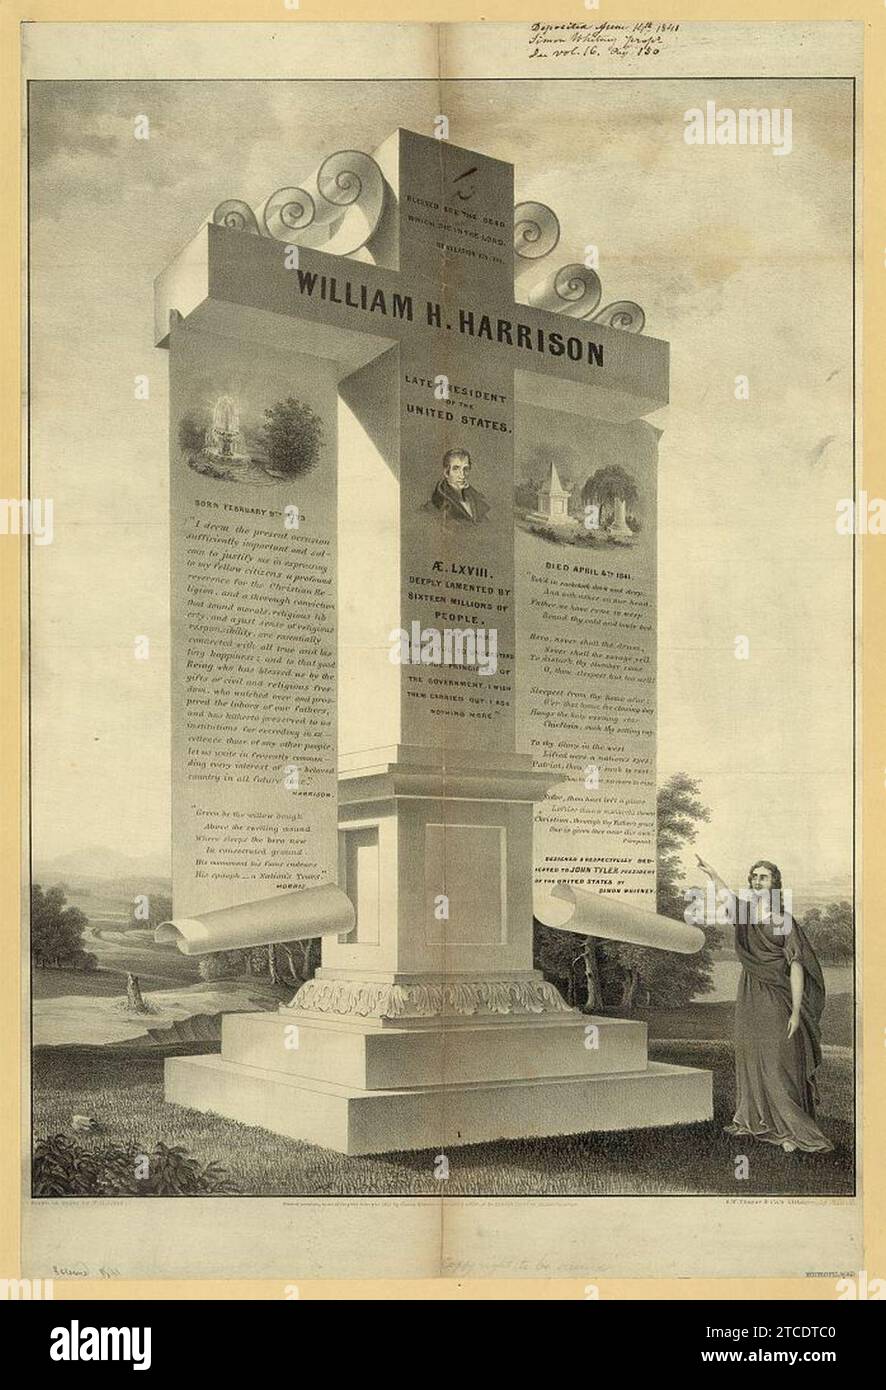 William H. Harrison. Late president of the United States. Æ LXVIII. Deeply lamented by sixteen millions of people - drawn on stone by F.H. Lane ; B.W. Thayer & Co.'s lithography, Boston. Stock Photo